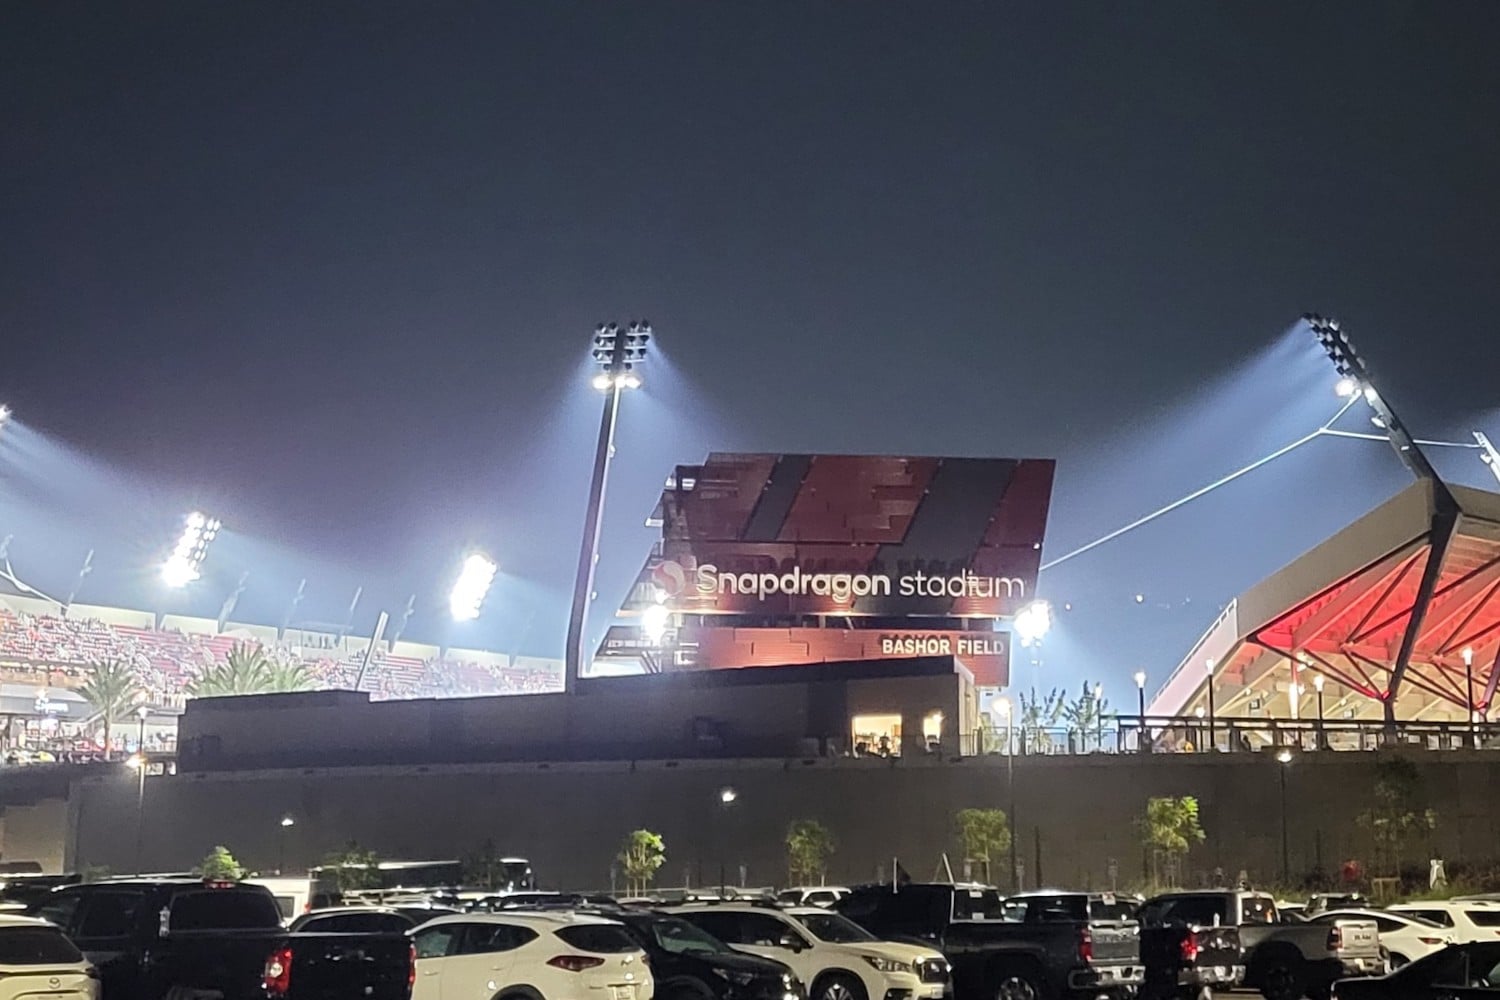 An exterior view of Snapdragon Stadium at night.